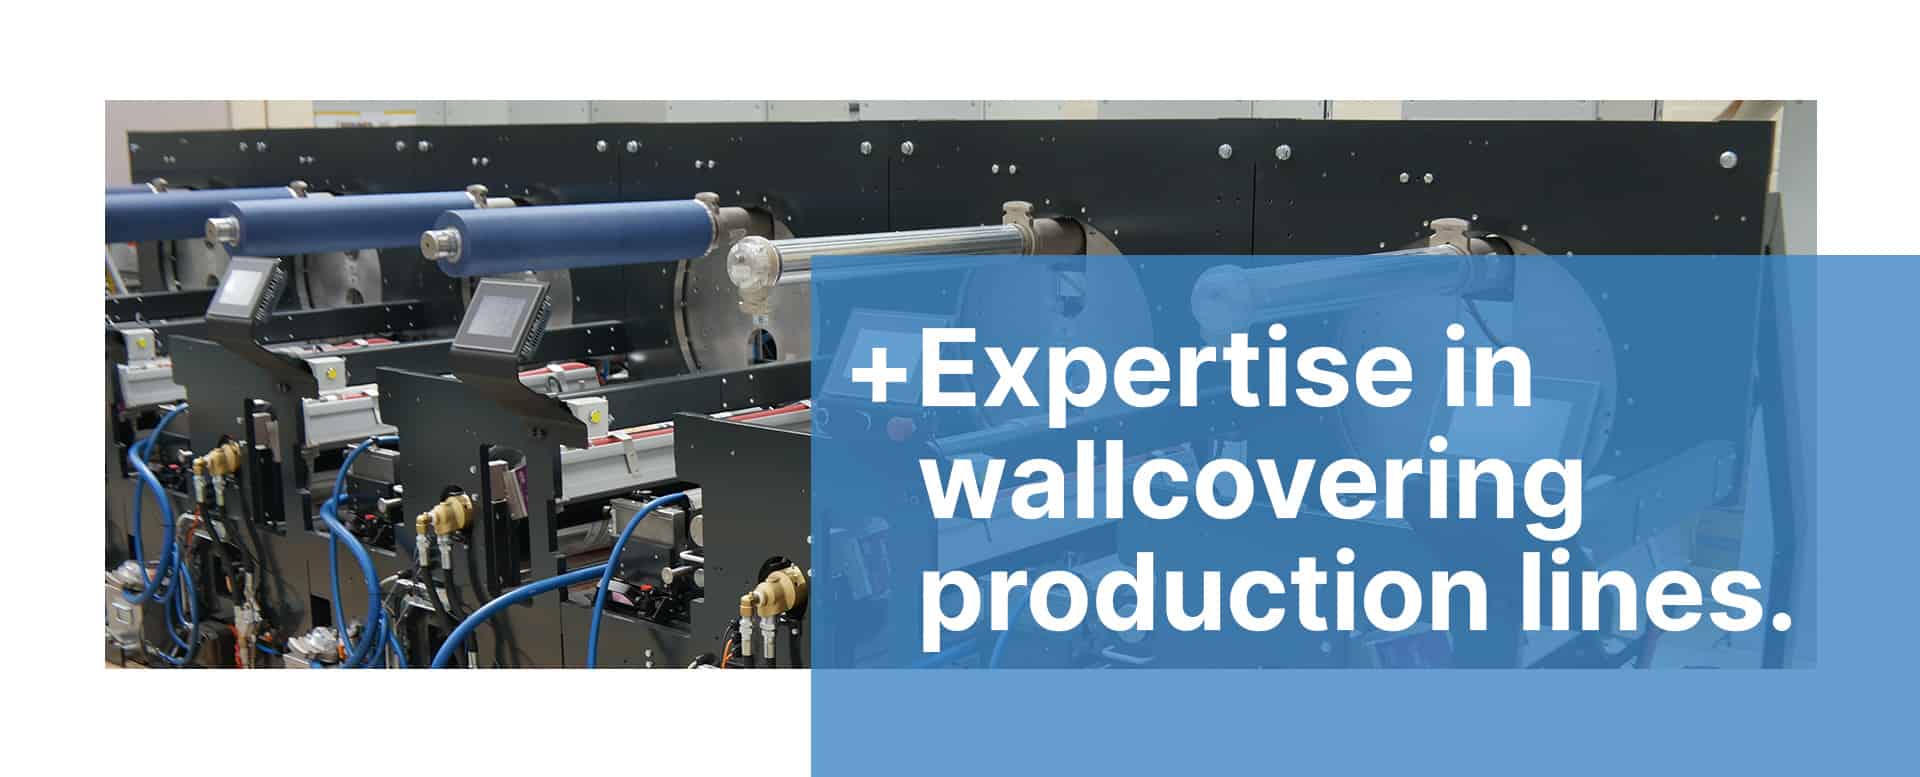 Print - Expertise in wallcovering production lines.